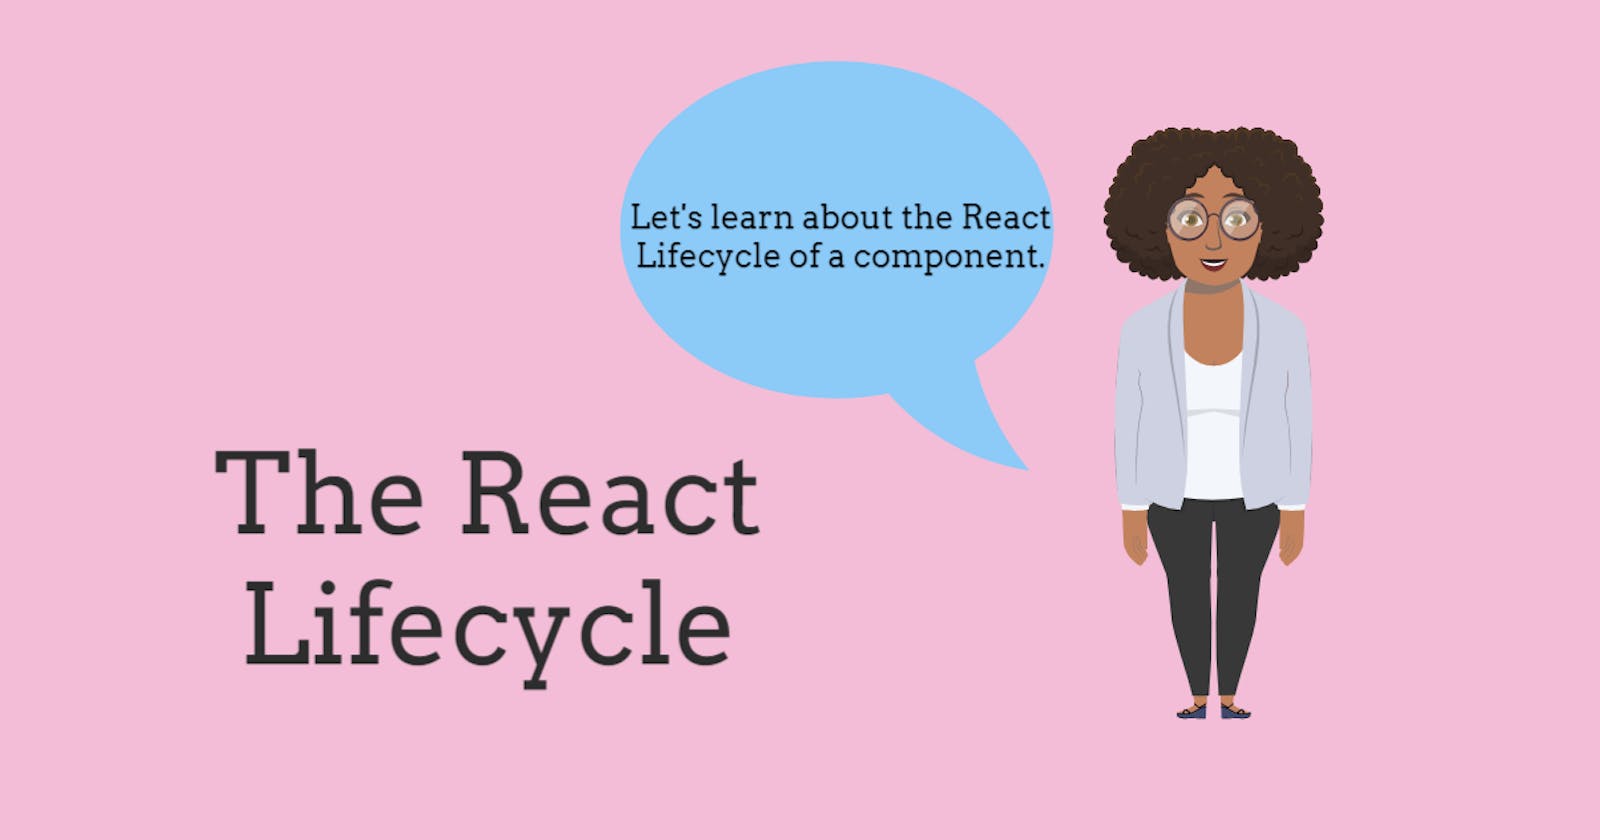 The React Lifecycle of a Component